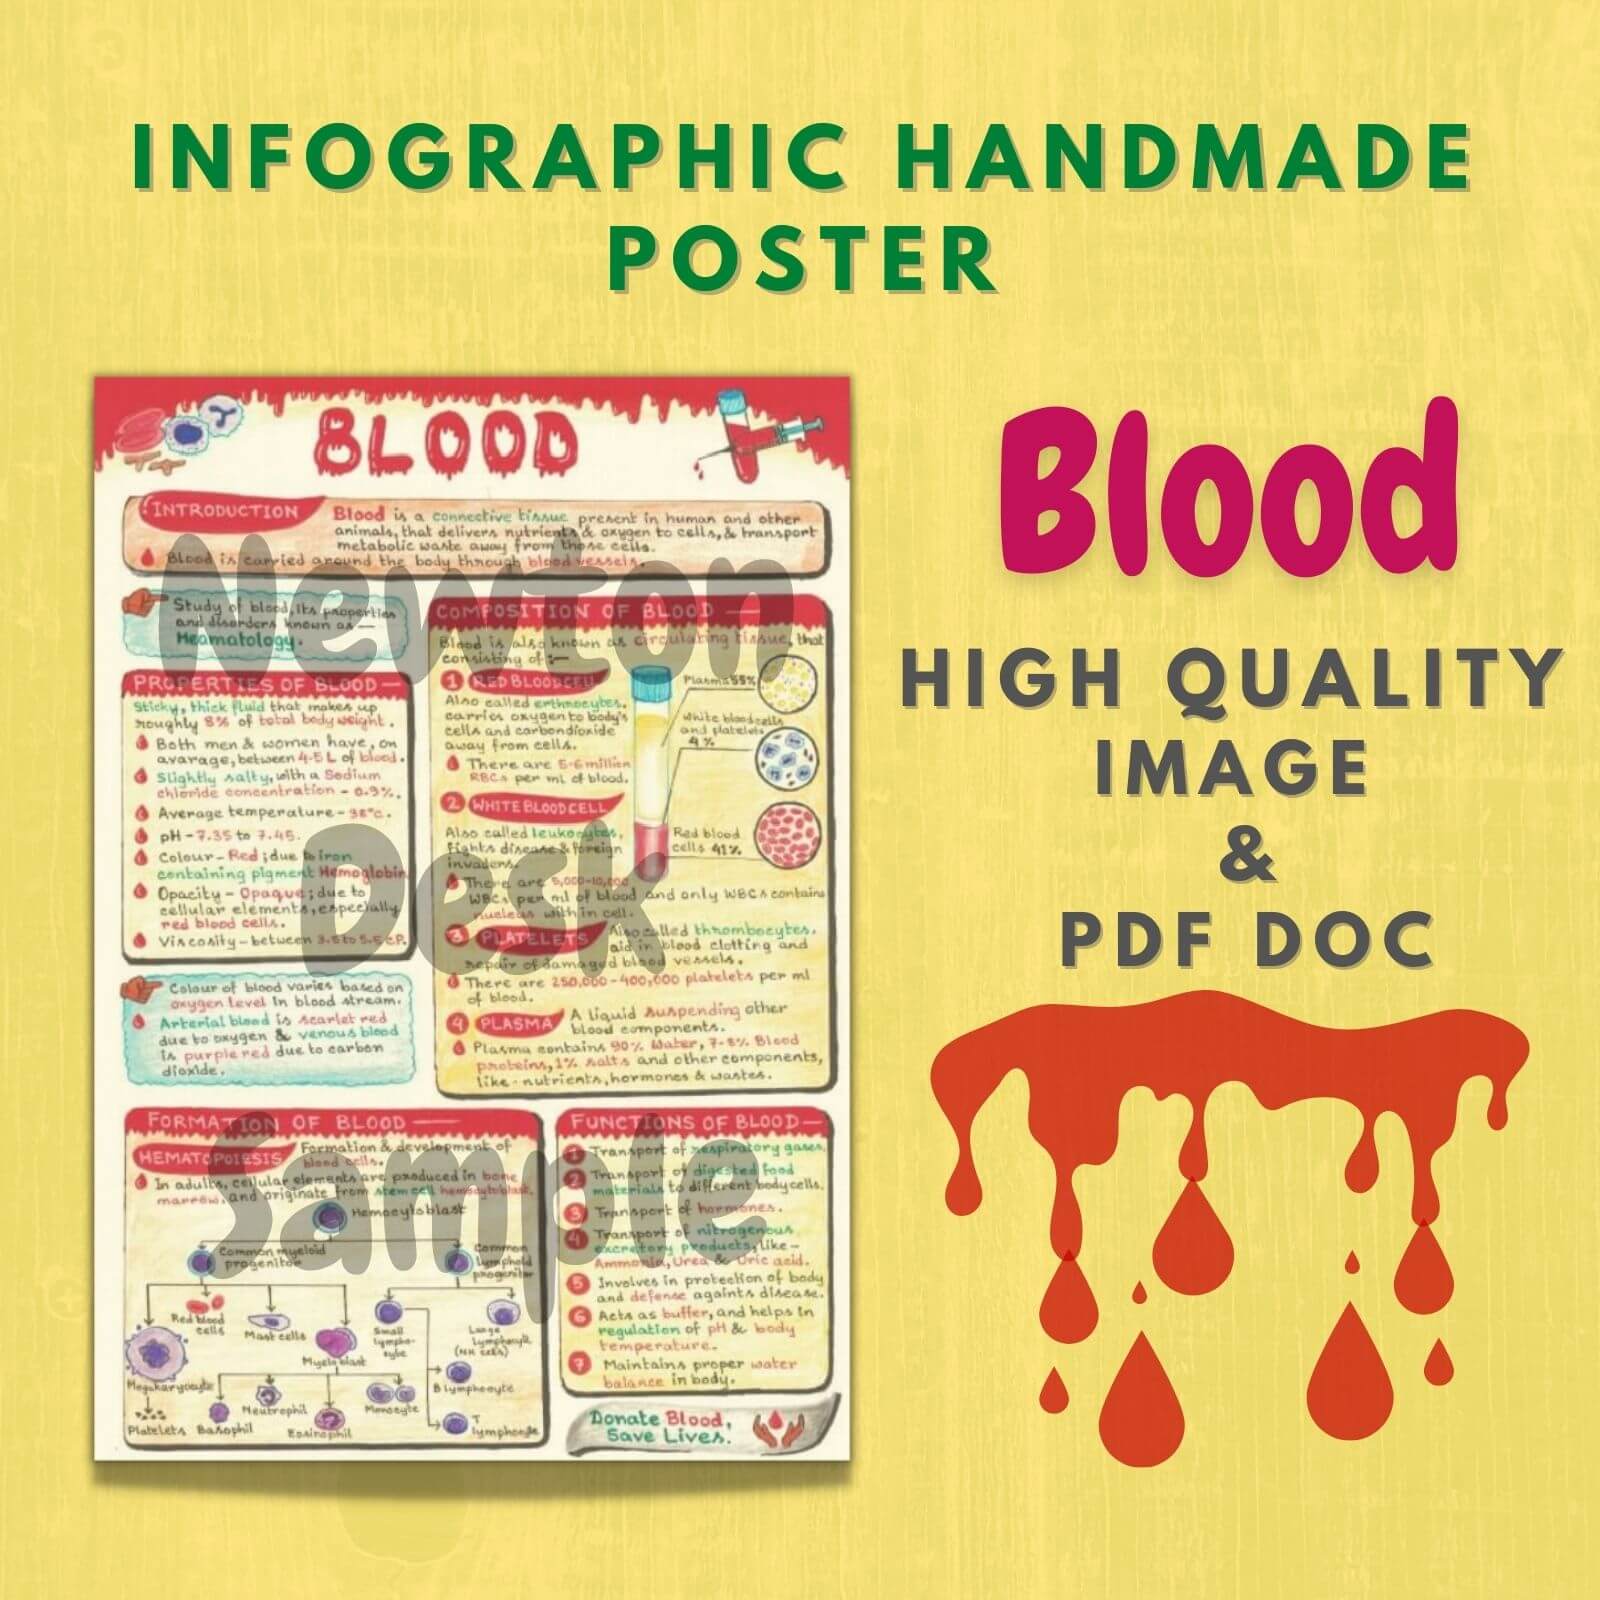 blood infographic aesthetic poster image in pdf